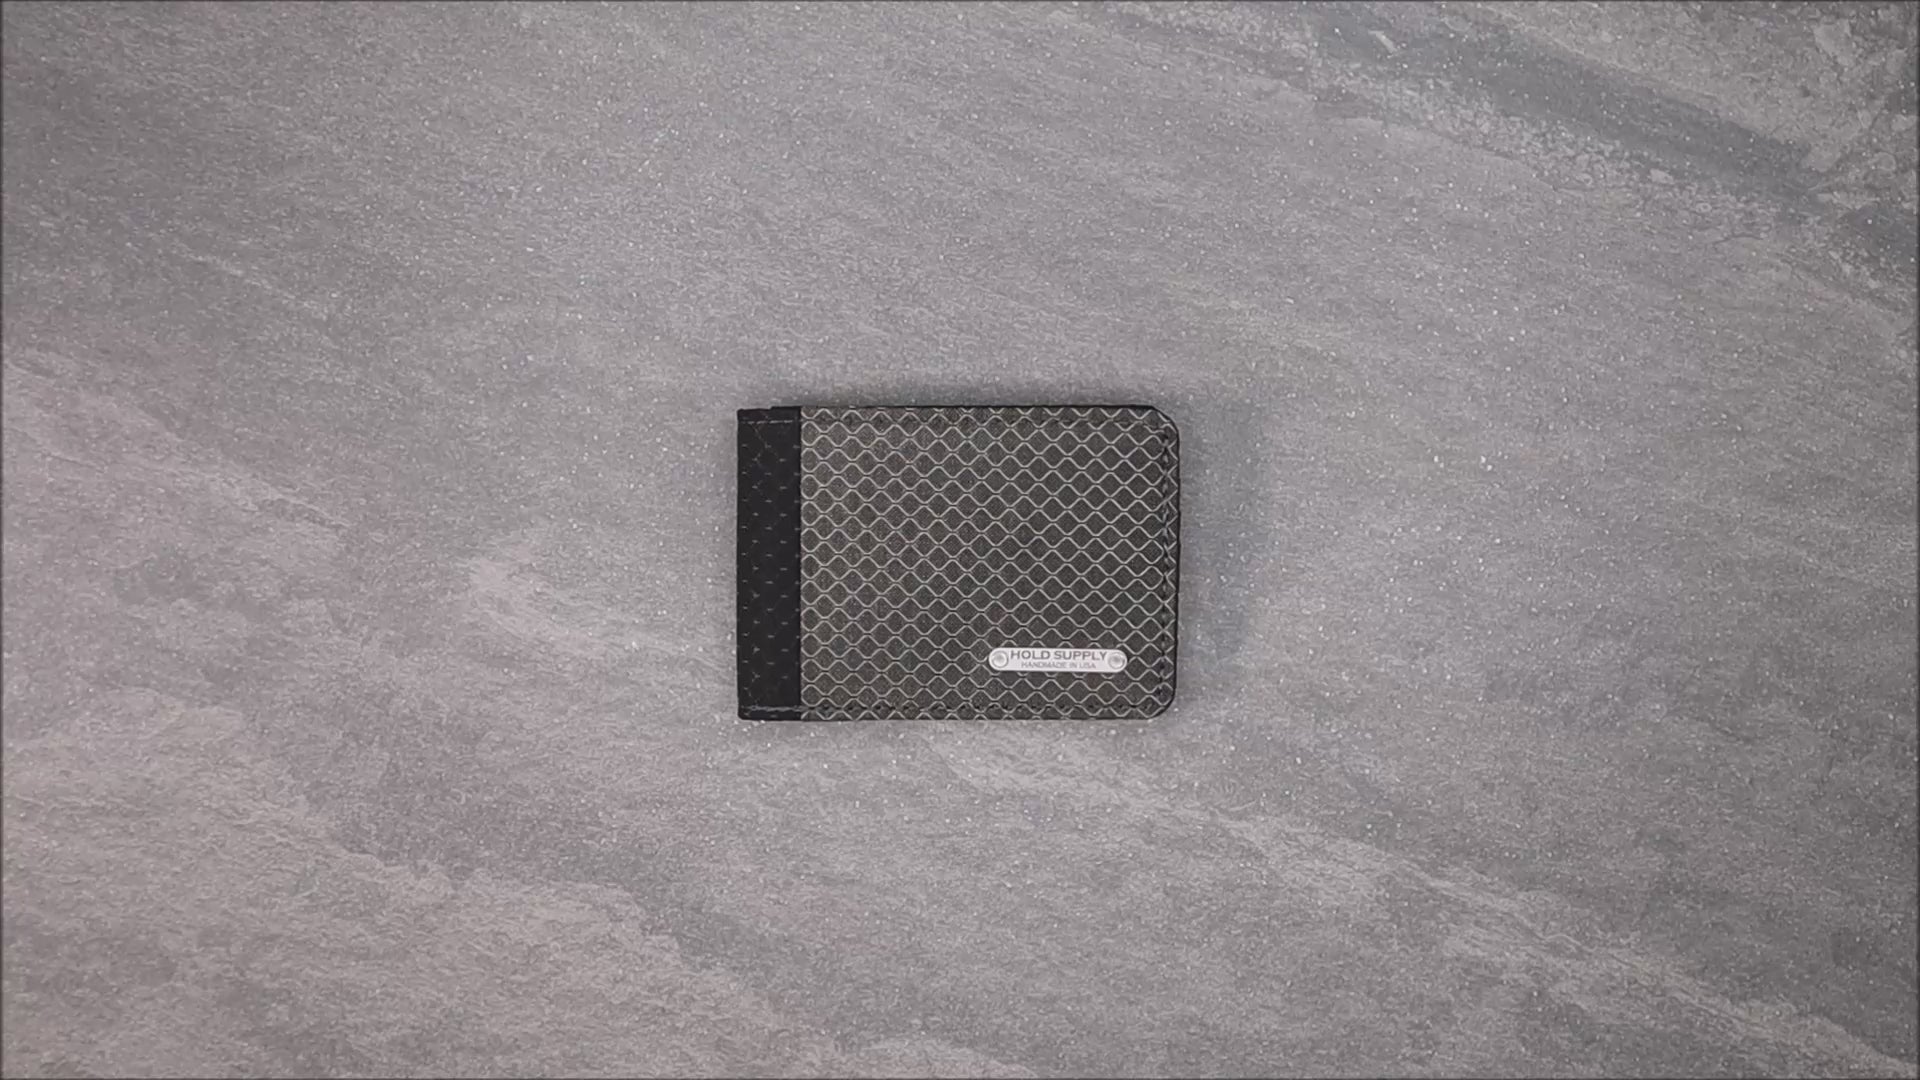 Gray and Black Ripstop Fabric Wallet